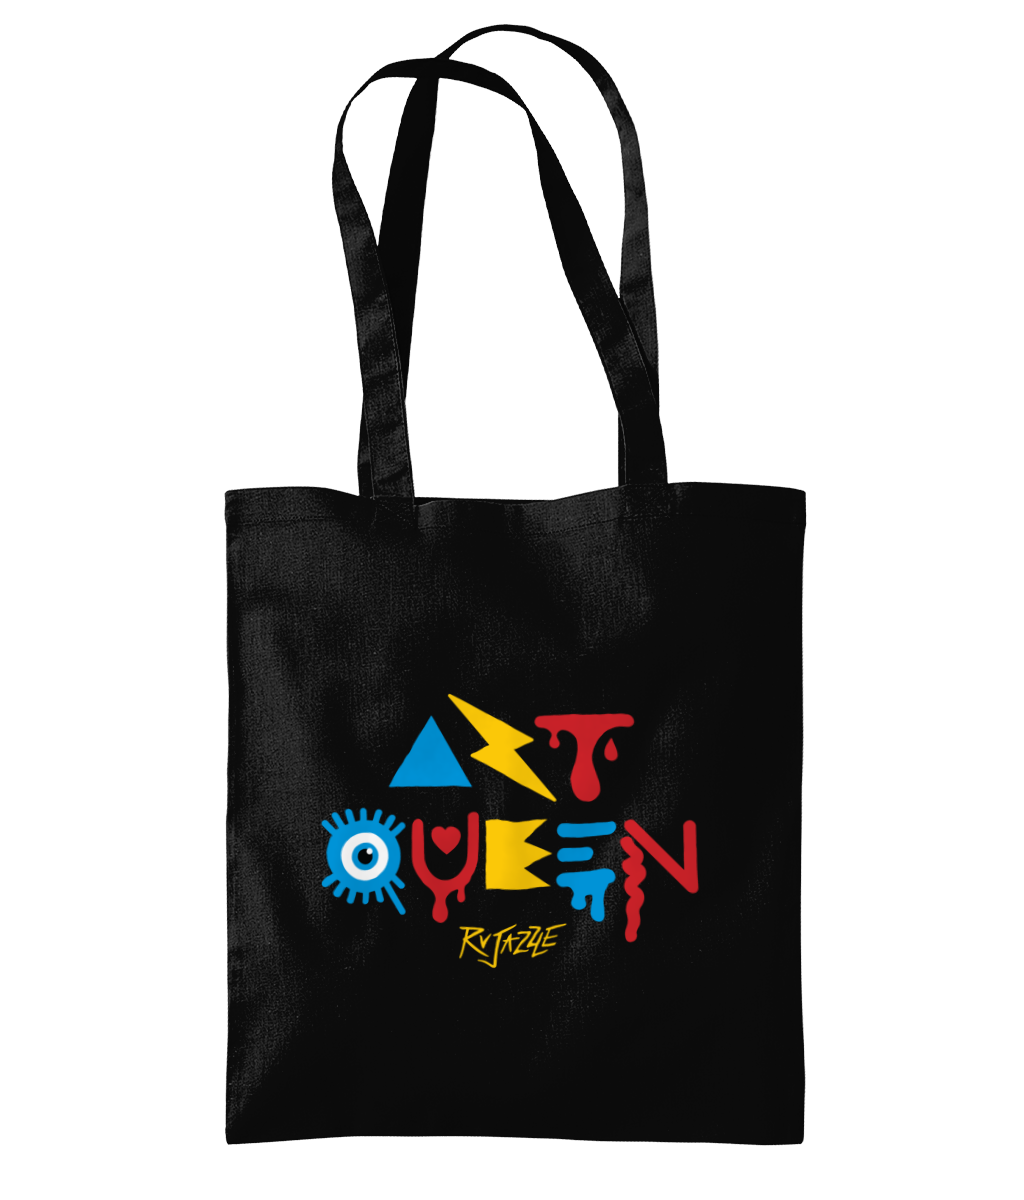 Rujazzle - Art Queen Tote Bag - SNATCHED